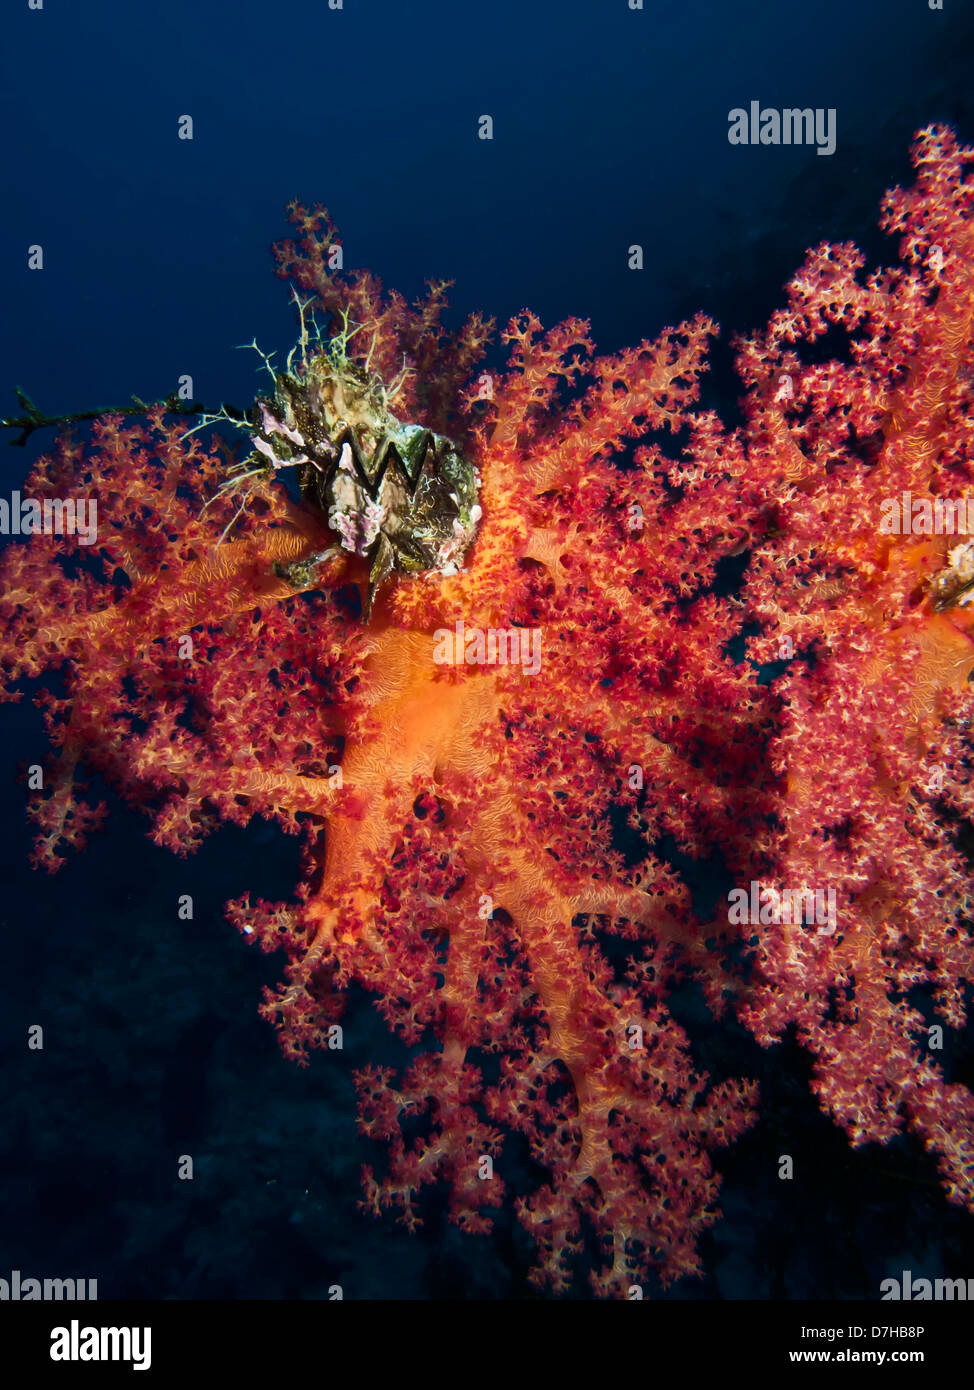 Soft Coral, Taken at Ras Mohamed in Red Sea, Egypt. Stock Photo